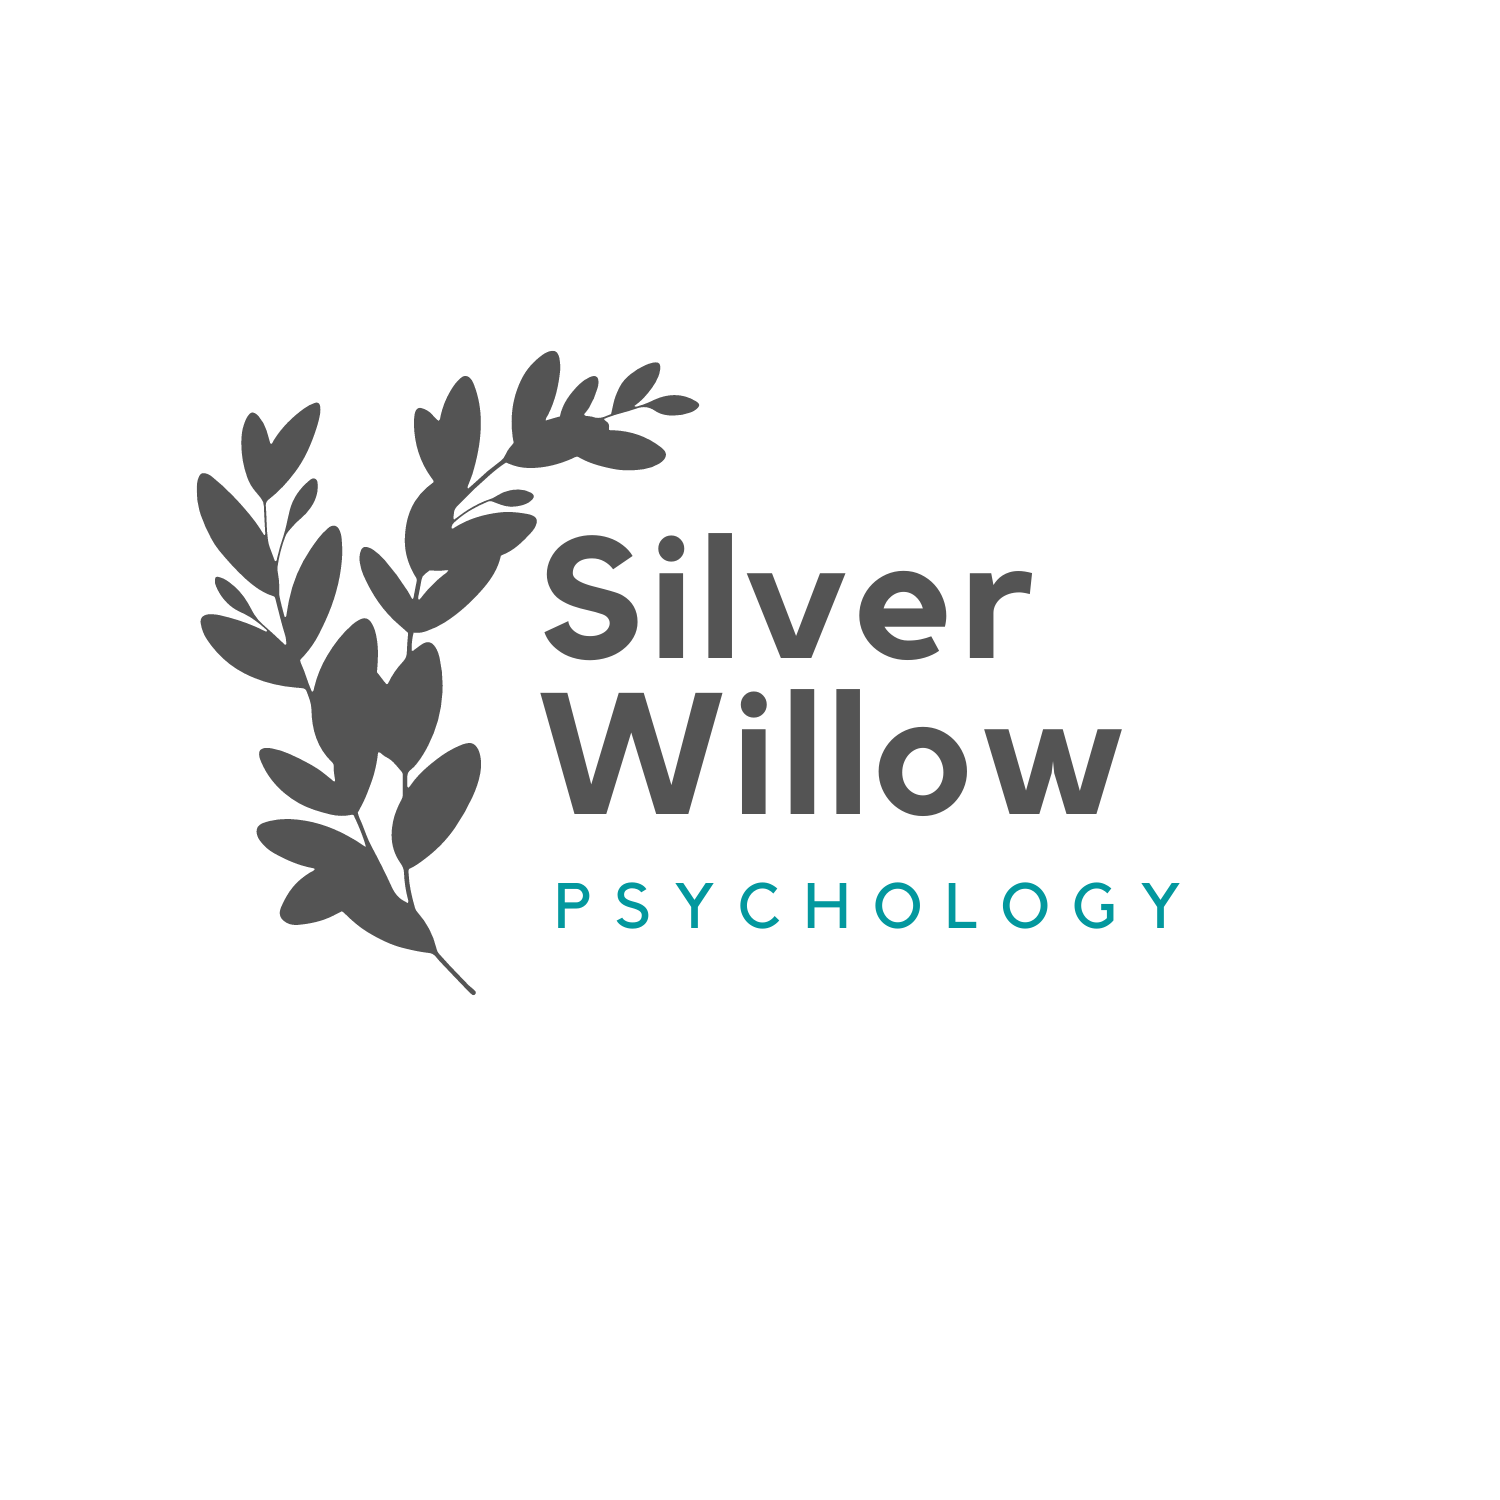 Gallery Photo of Silver Willow Psychology 